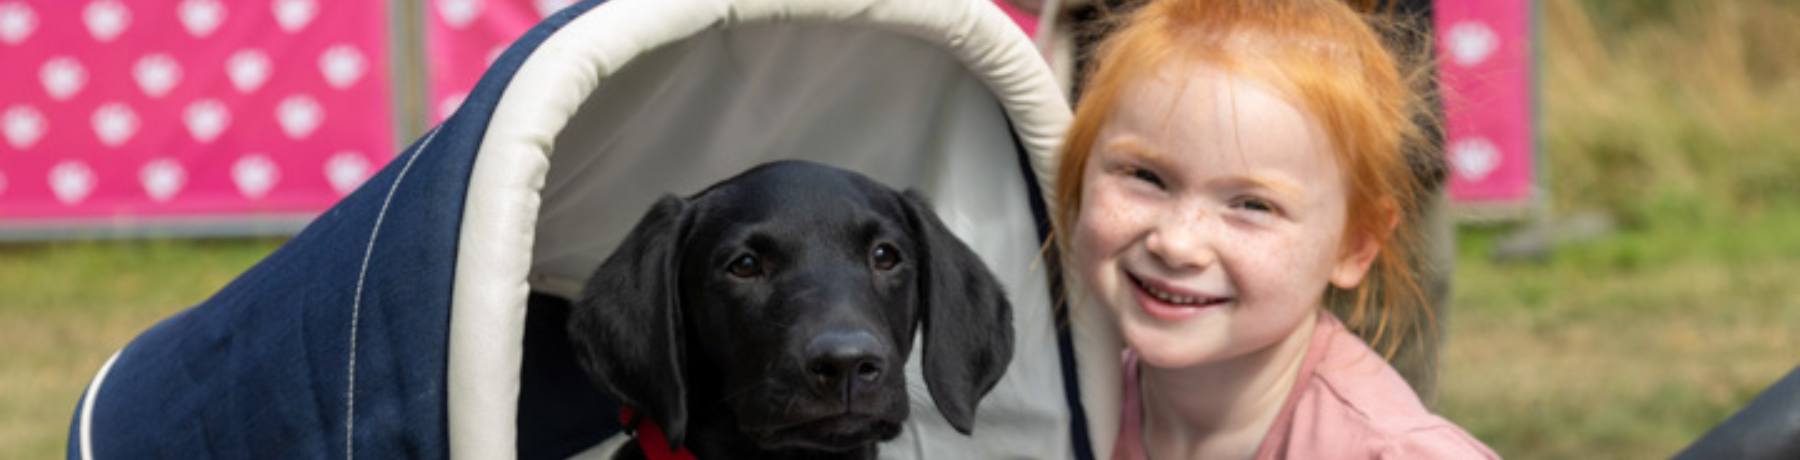 Top Things For Kids And Dogs To Do At DogFest image